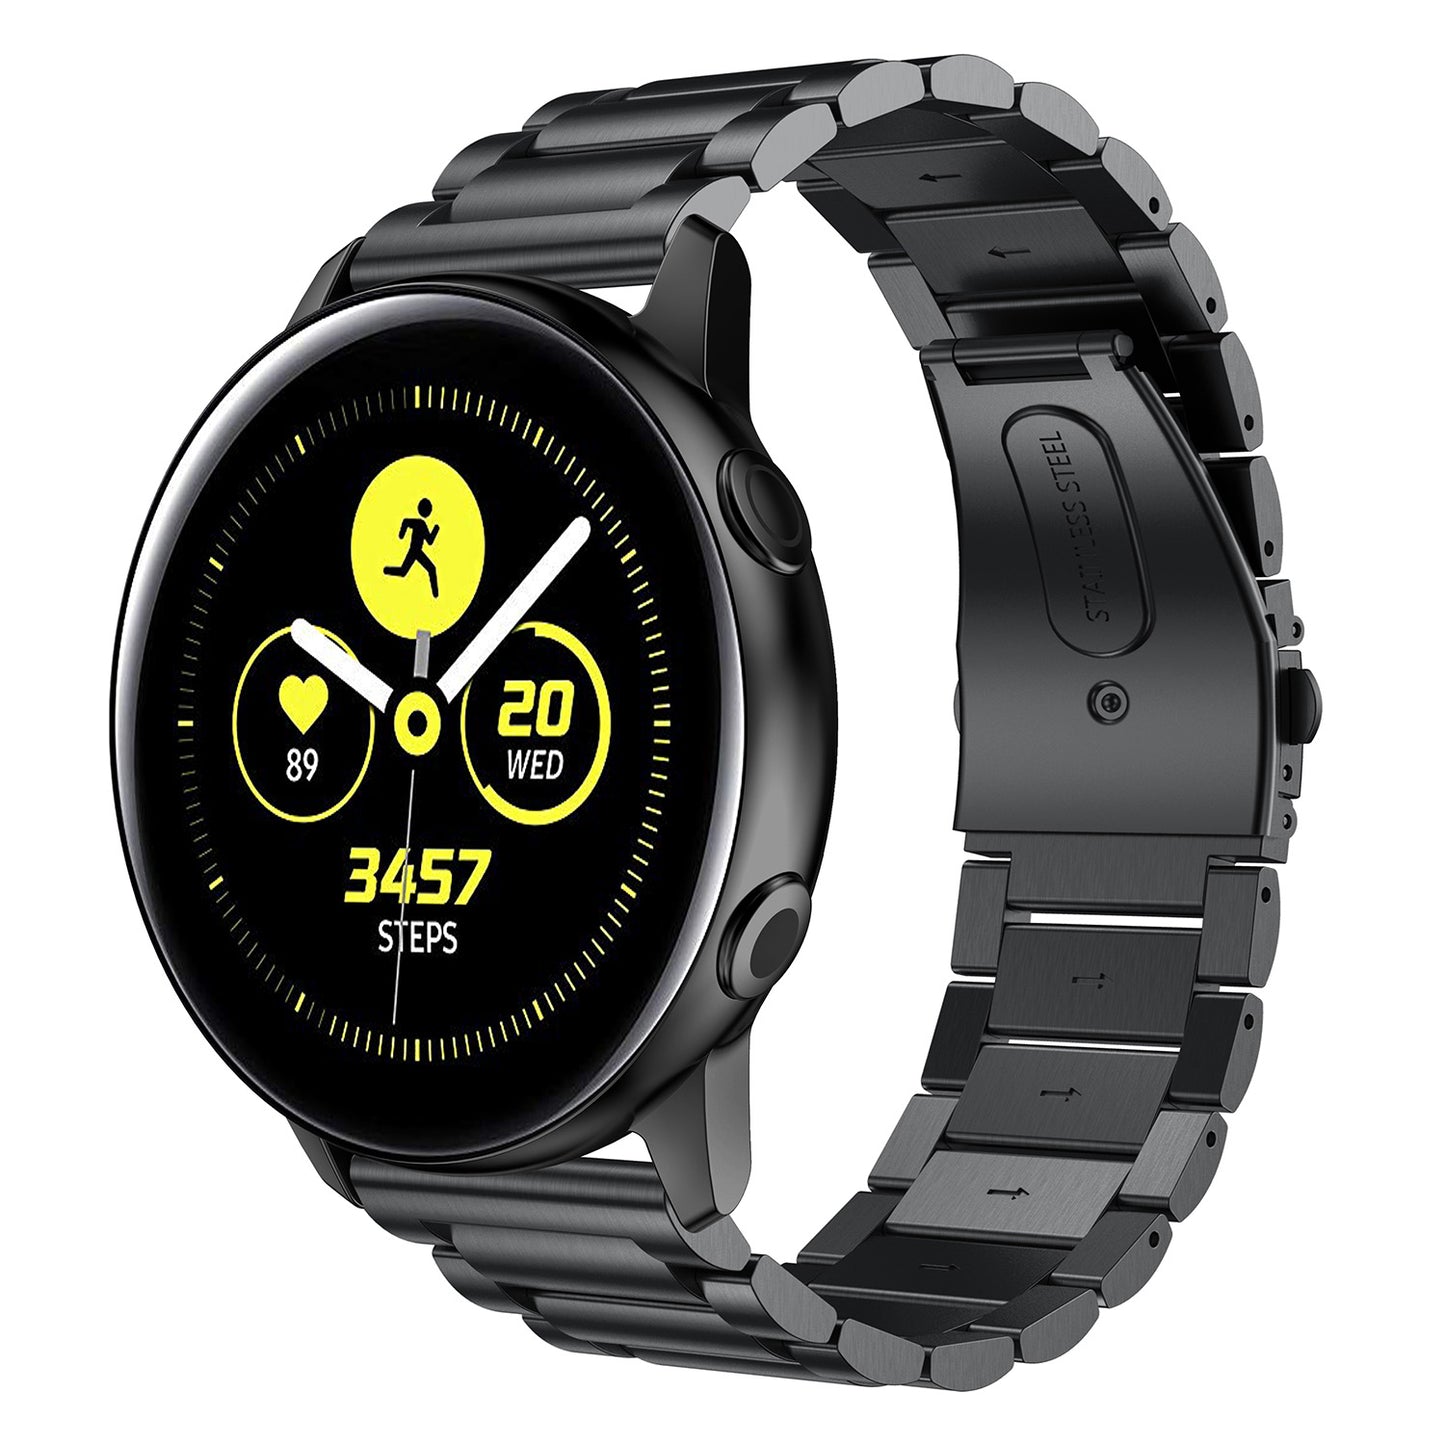 Metal Band for Samsung Galaxy Watch 42mm / Galaxy Watch Active / Gear S2 Classic